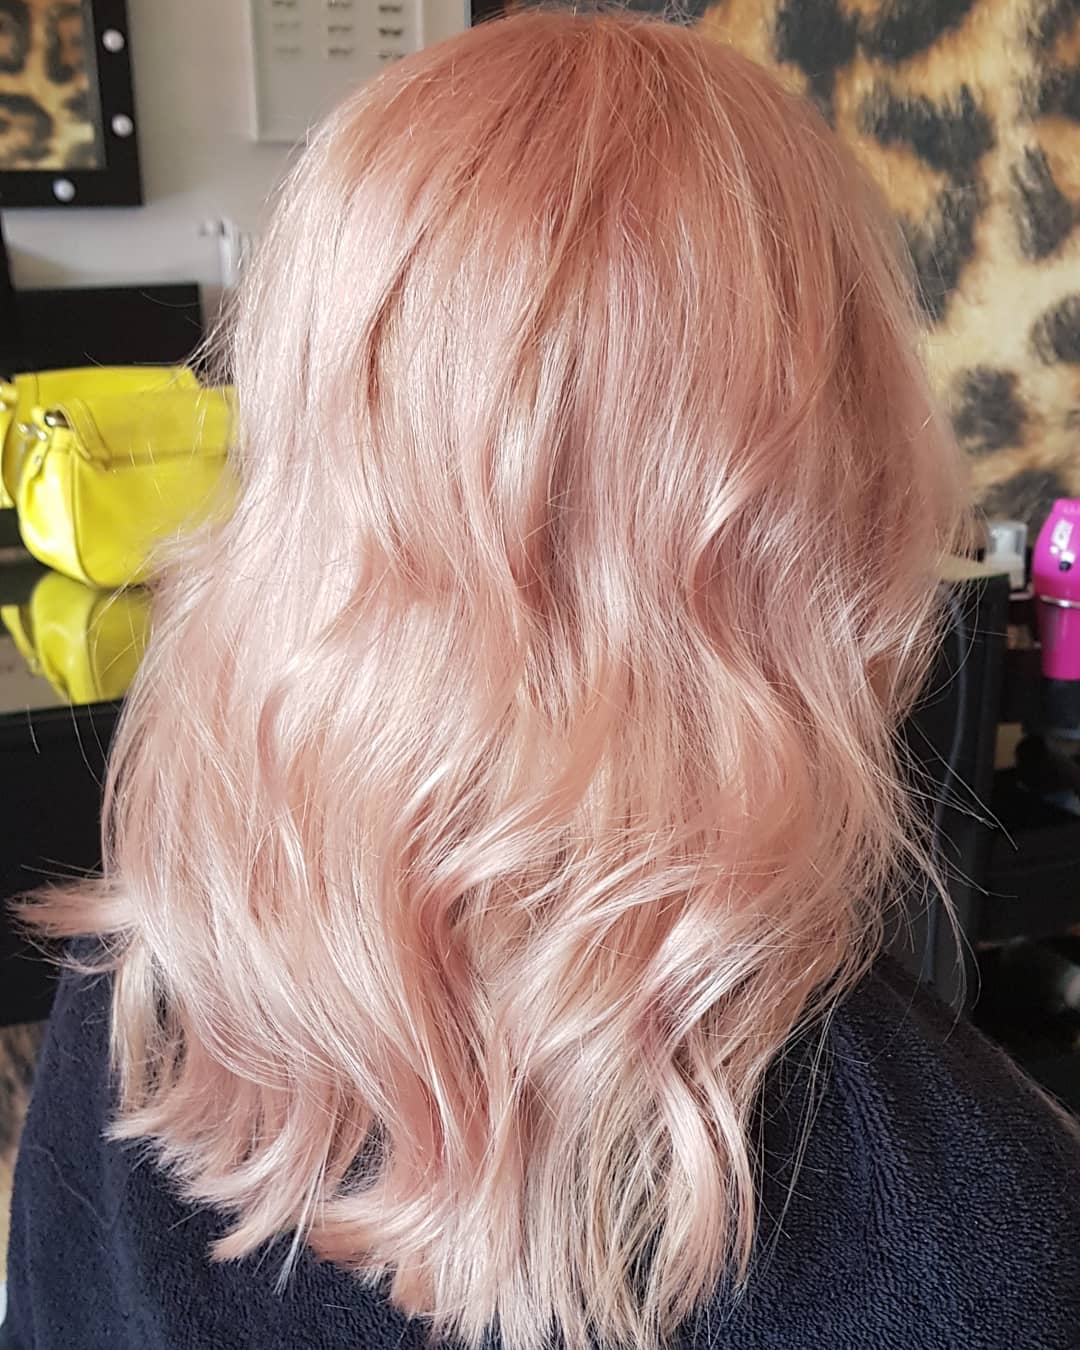 Pastel hair color. Pic by blush_brugge